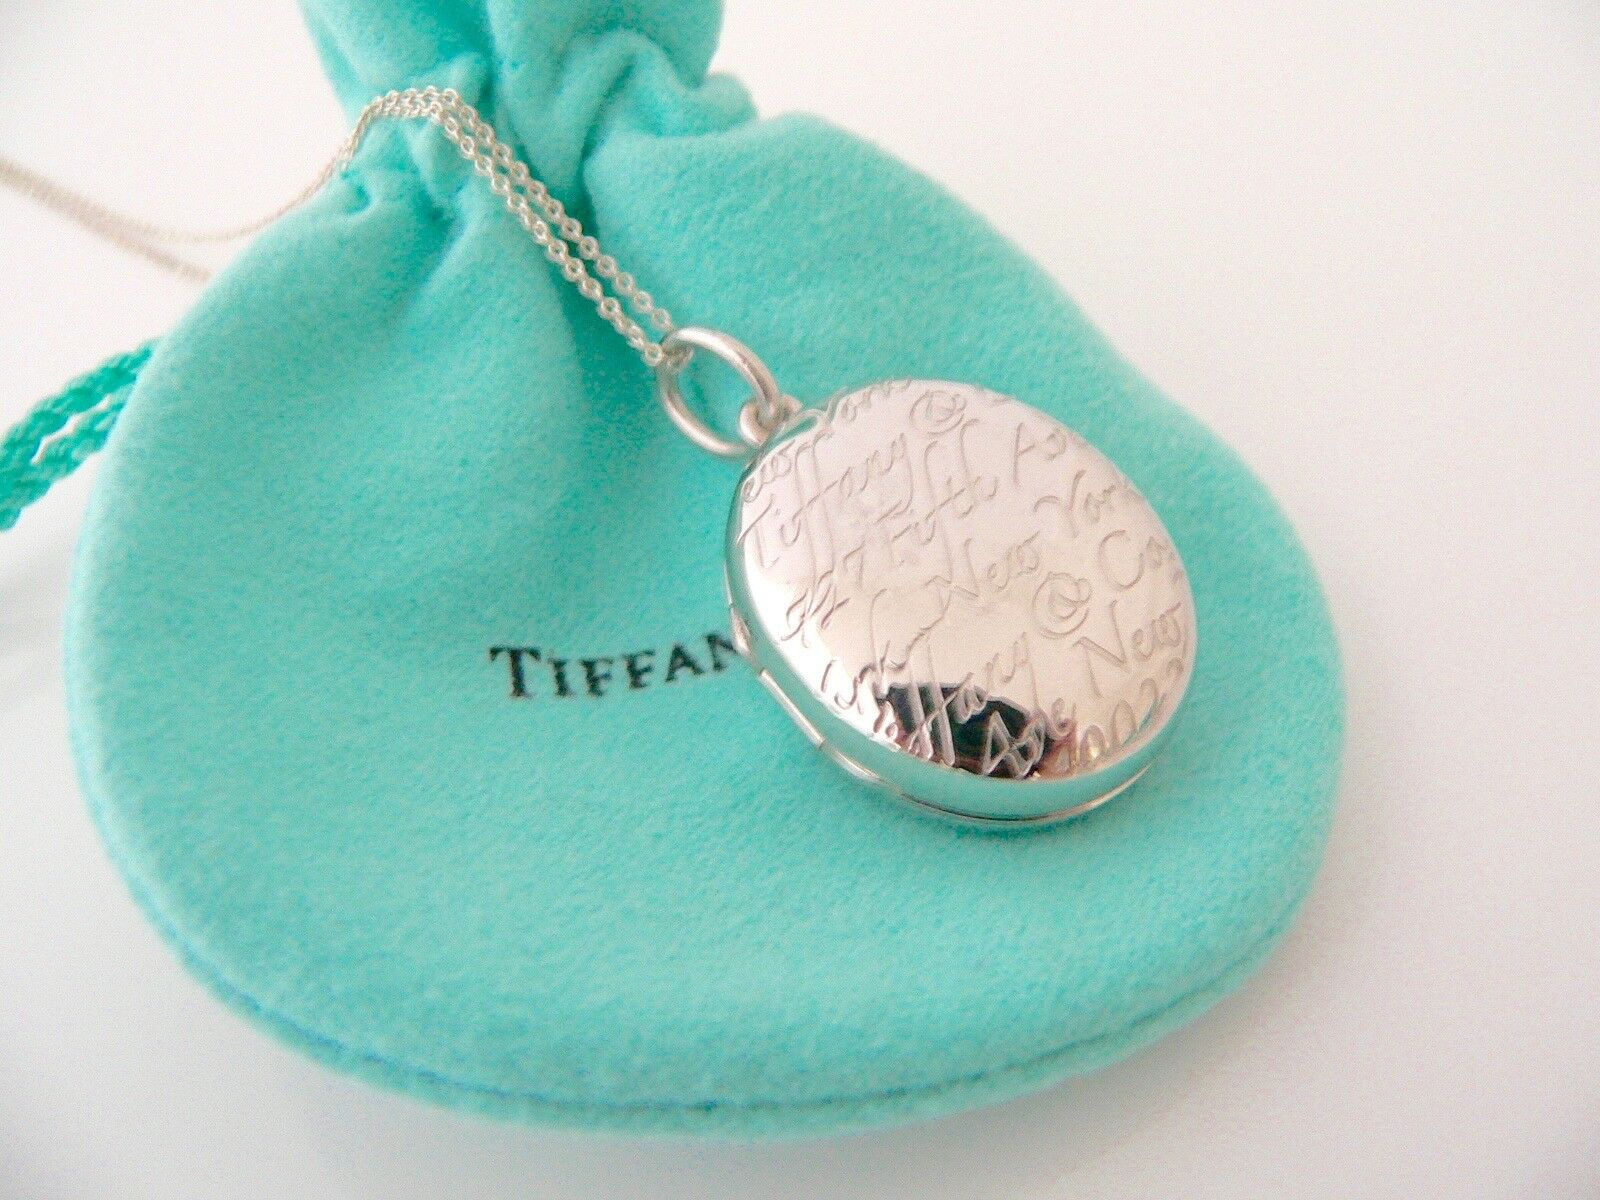 Tiffany & Co Notes Oval Locket Necklace Pendant Charm 18 Inch Chain Silver Gift